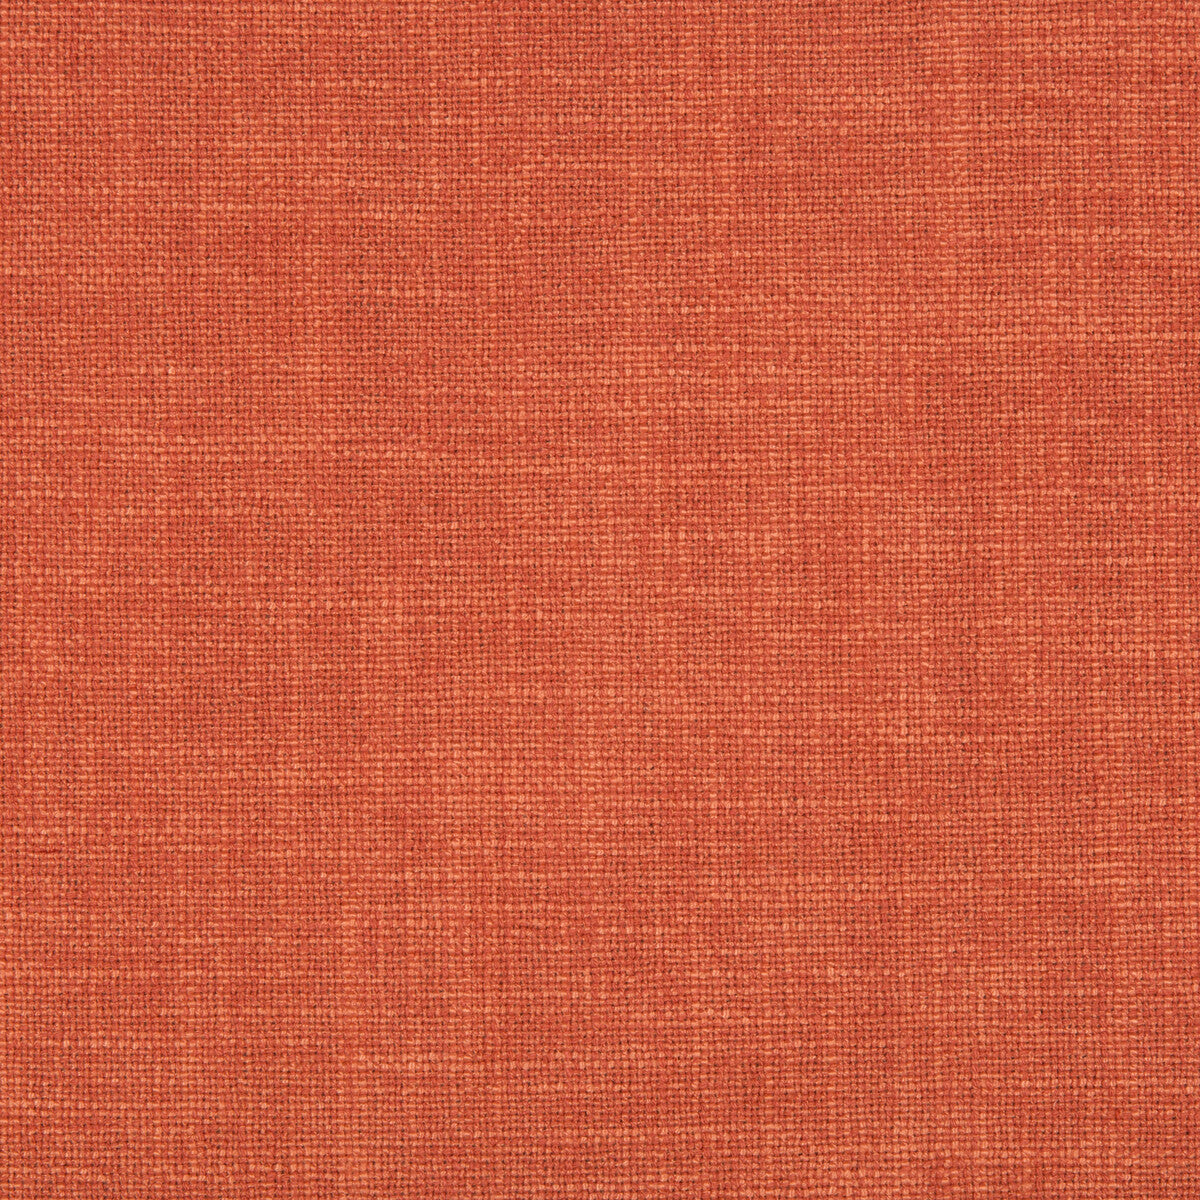 Everywhere fabric in cinnabar color - pattern 34587.12.0 - by Kravet Basics in the Thom Filicia Altitude collection